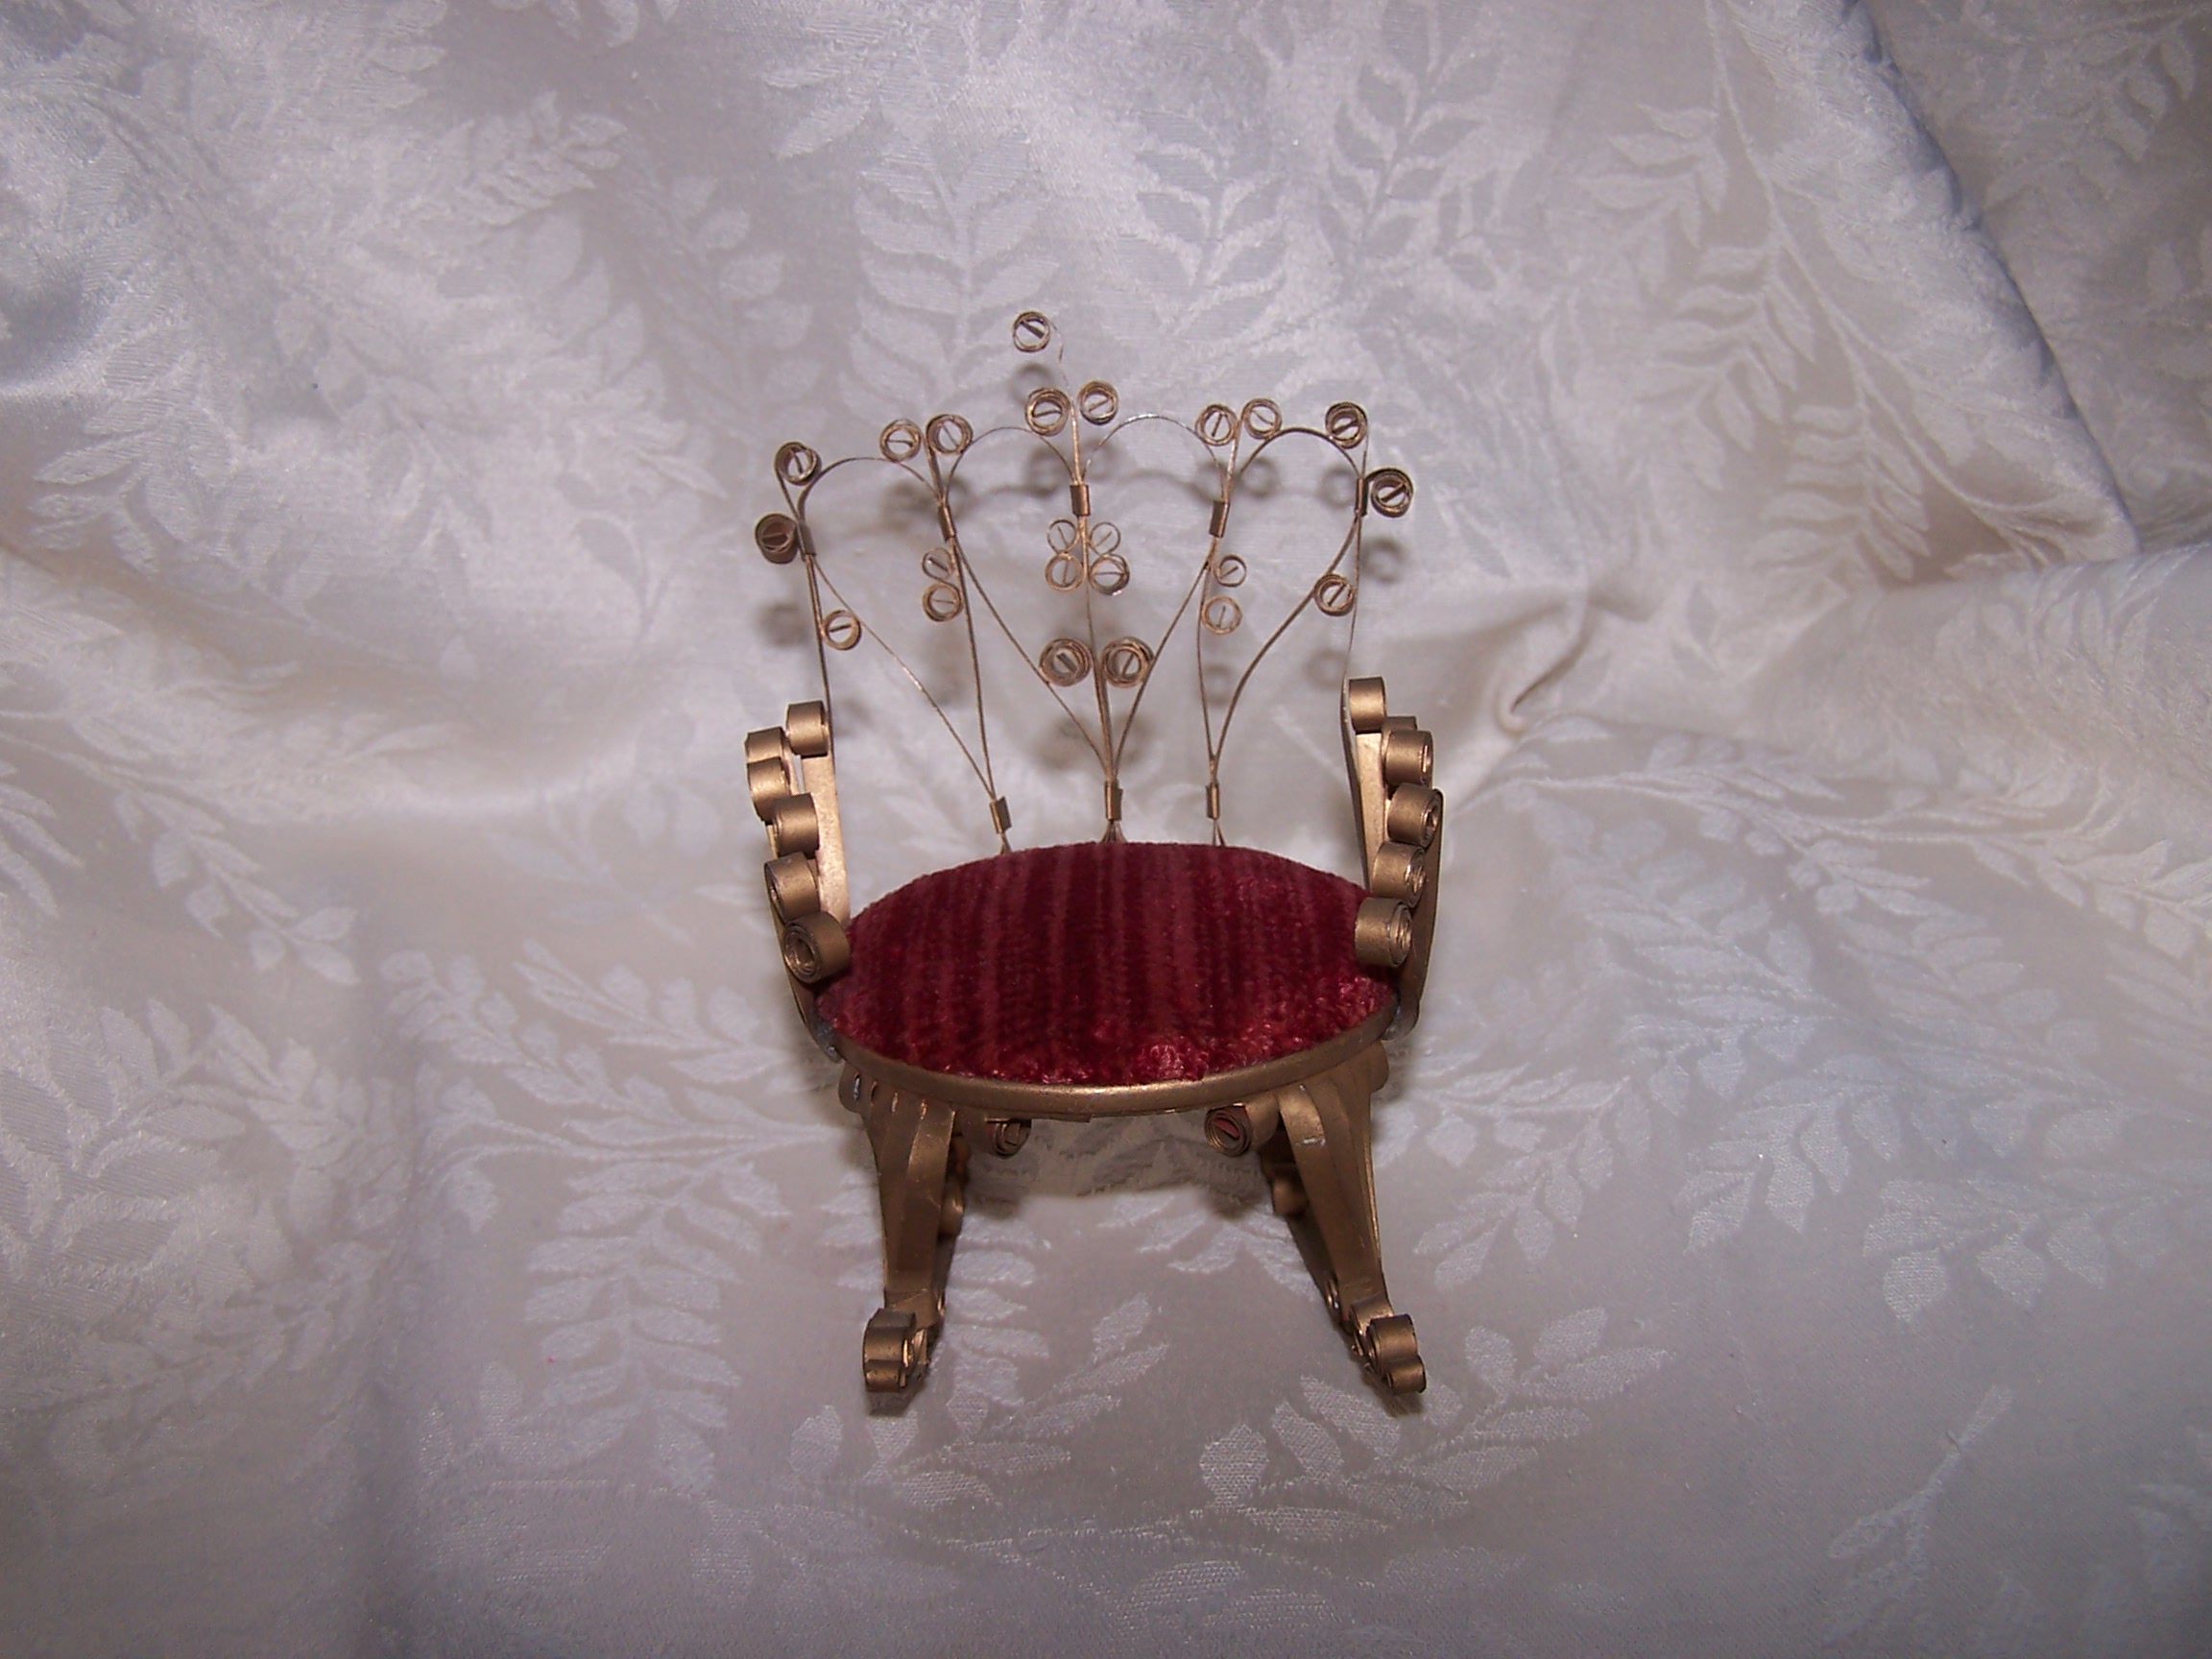 Image 3 of Quilled Pin Cushion Rocking Chair, Gold, Red Plush, Vintage